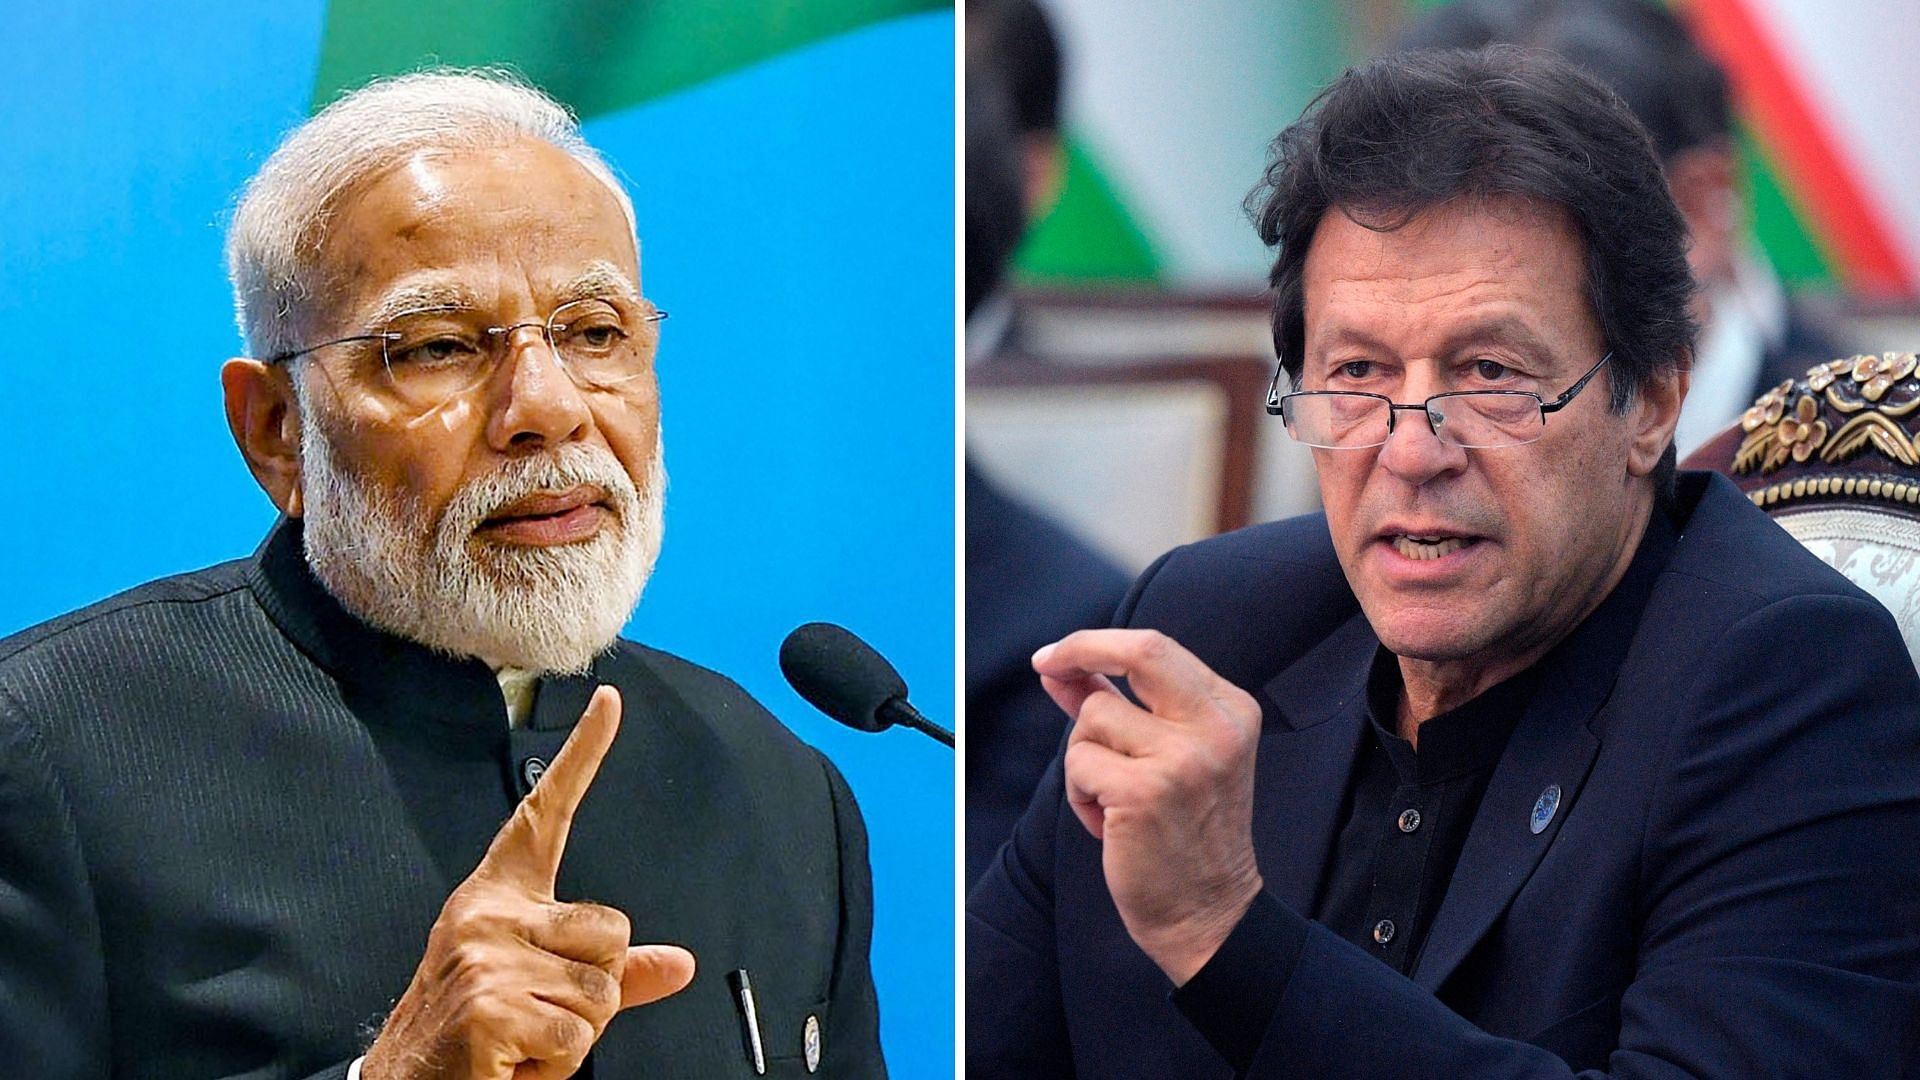 Prime Minister Narendra Modi and his Pakistani counterpart Imran Khan exchanged pleasantries on Friday, 14 June during the SCO summit.